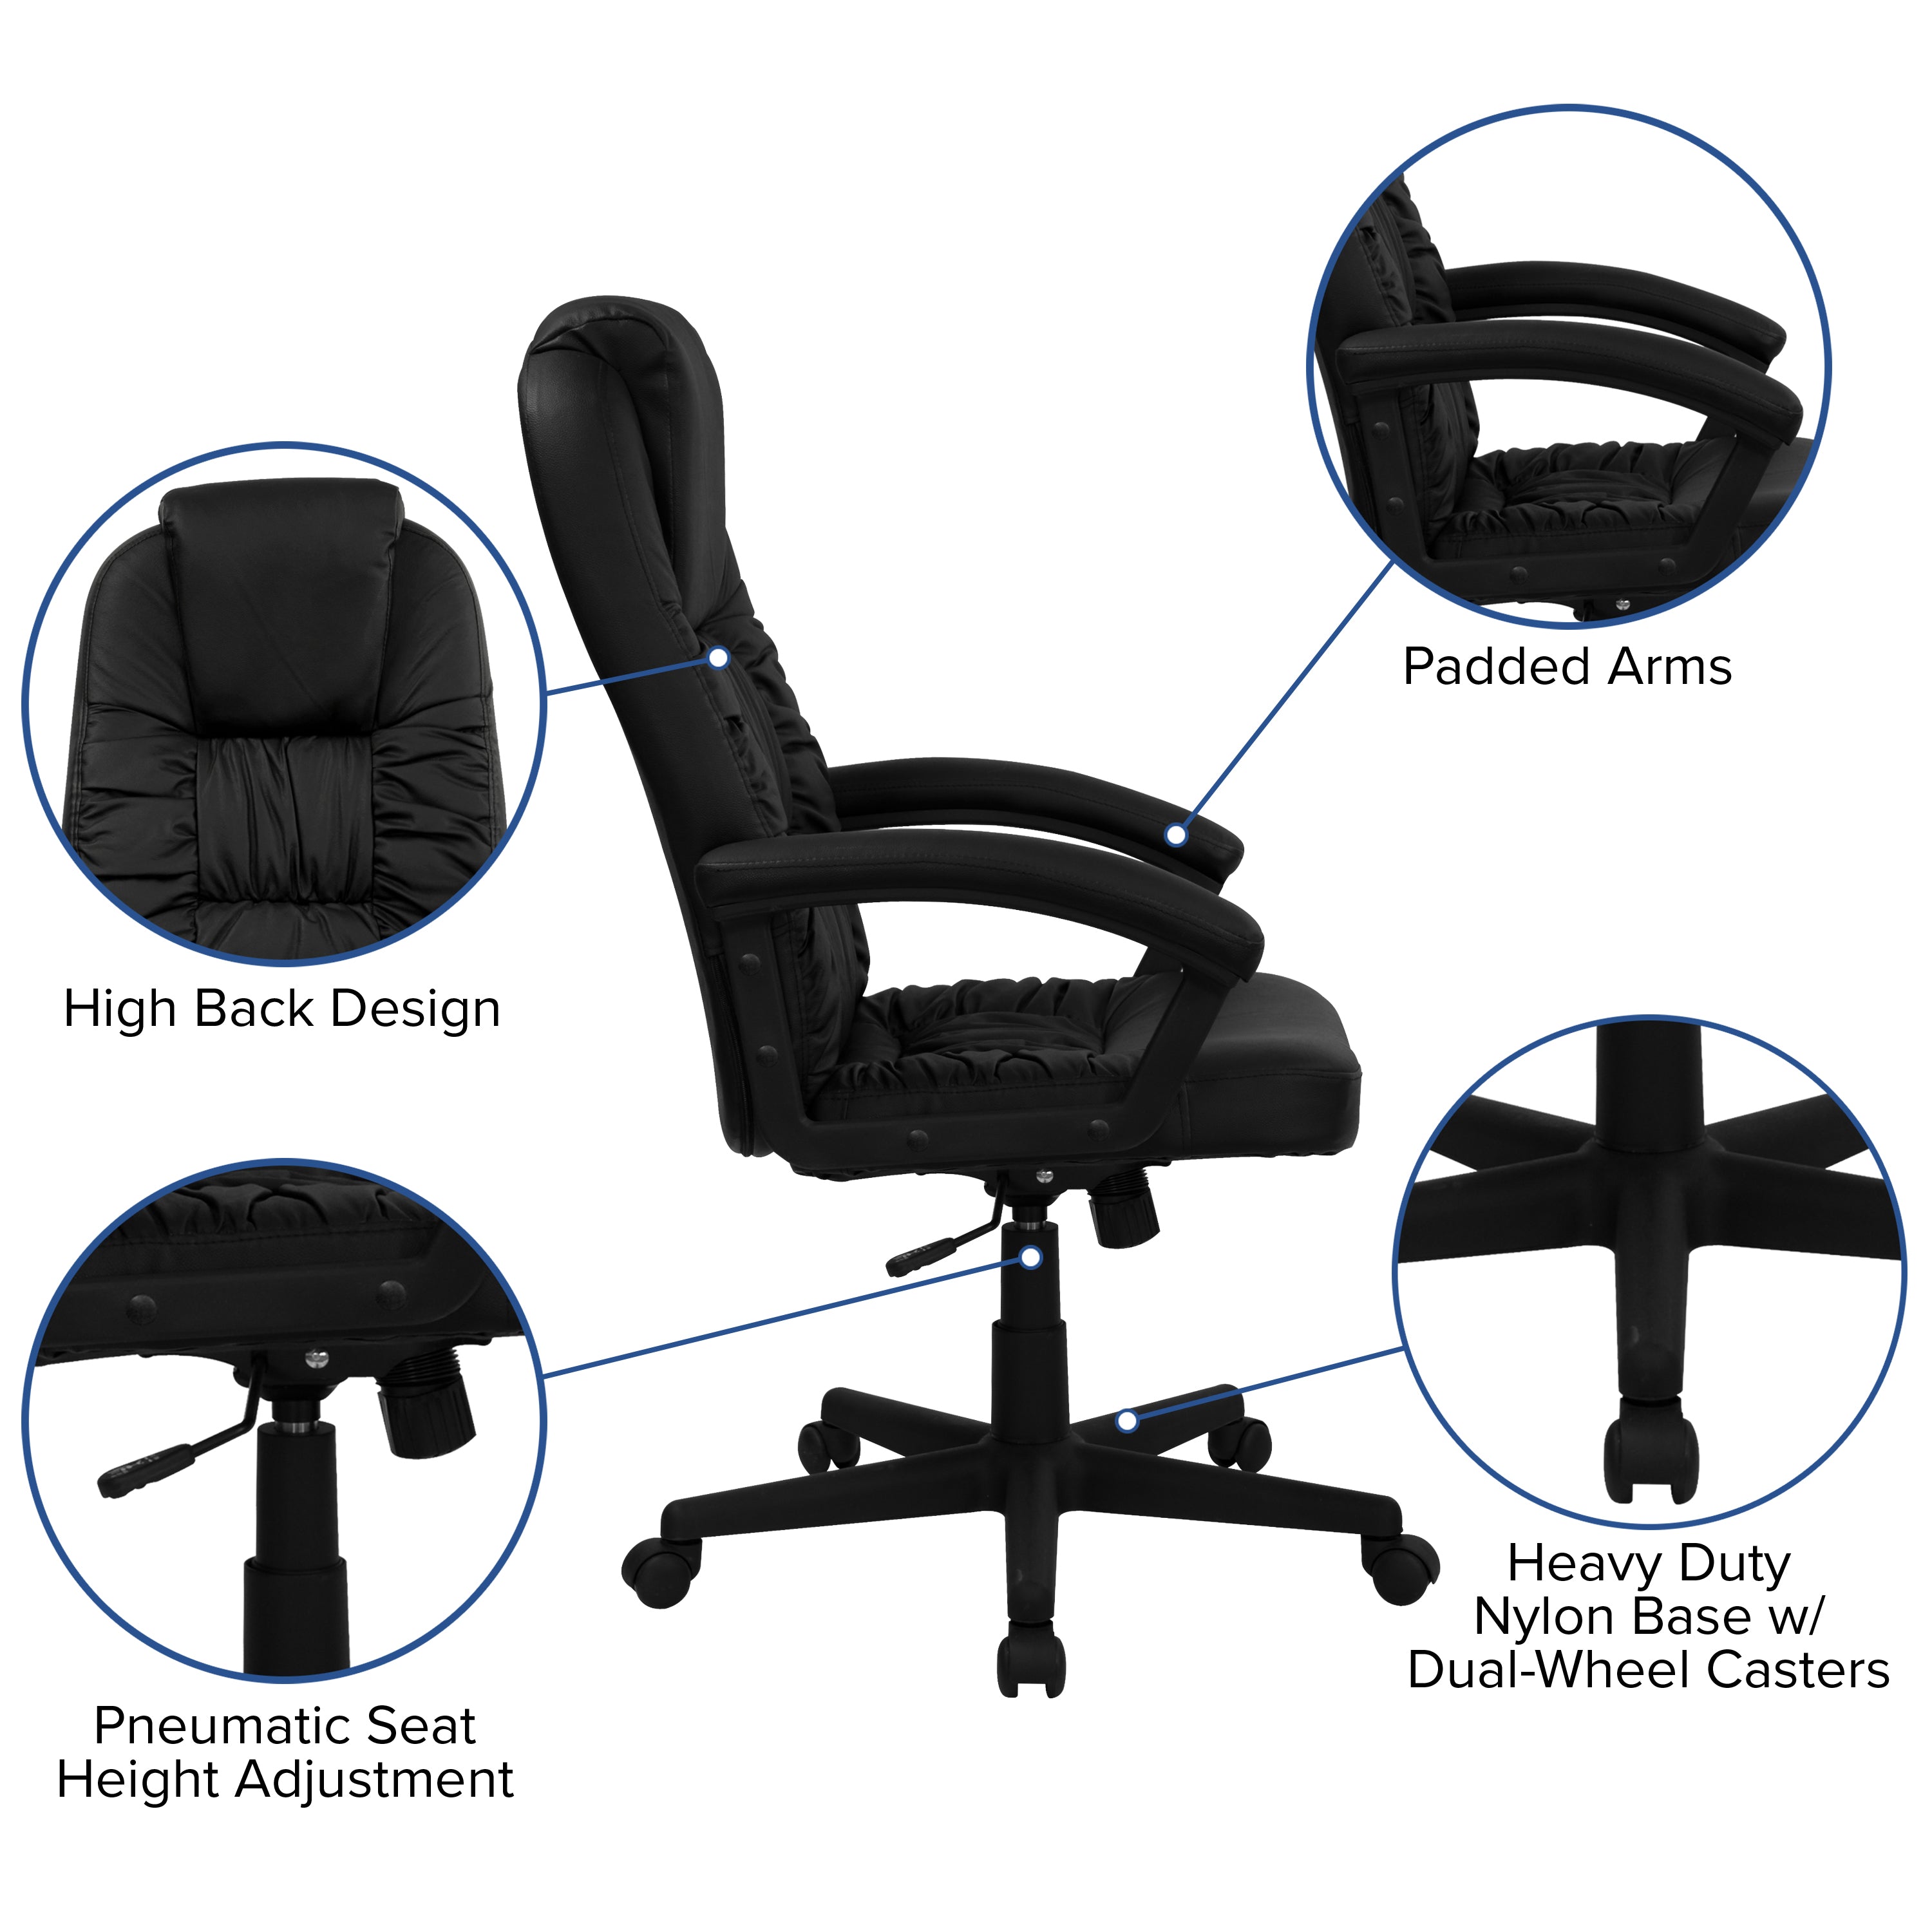 High Back LeatherSoft Soft Ripple Upholstered Executive Swivel Office Chair with Padded Arms-Office Chair-Flash Furniture-Wall2Wall Furnishings